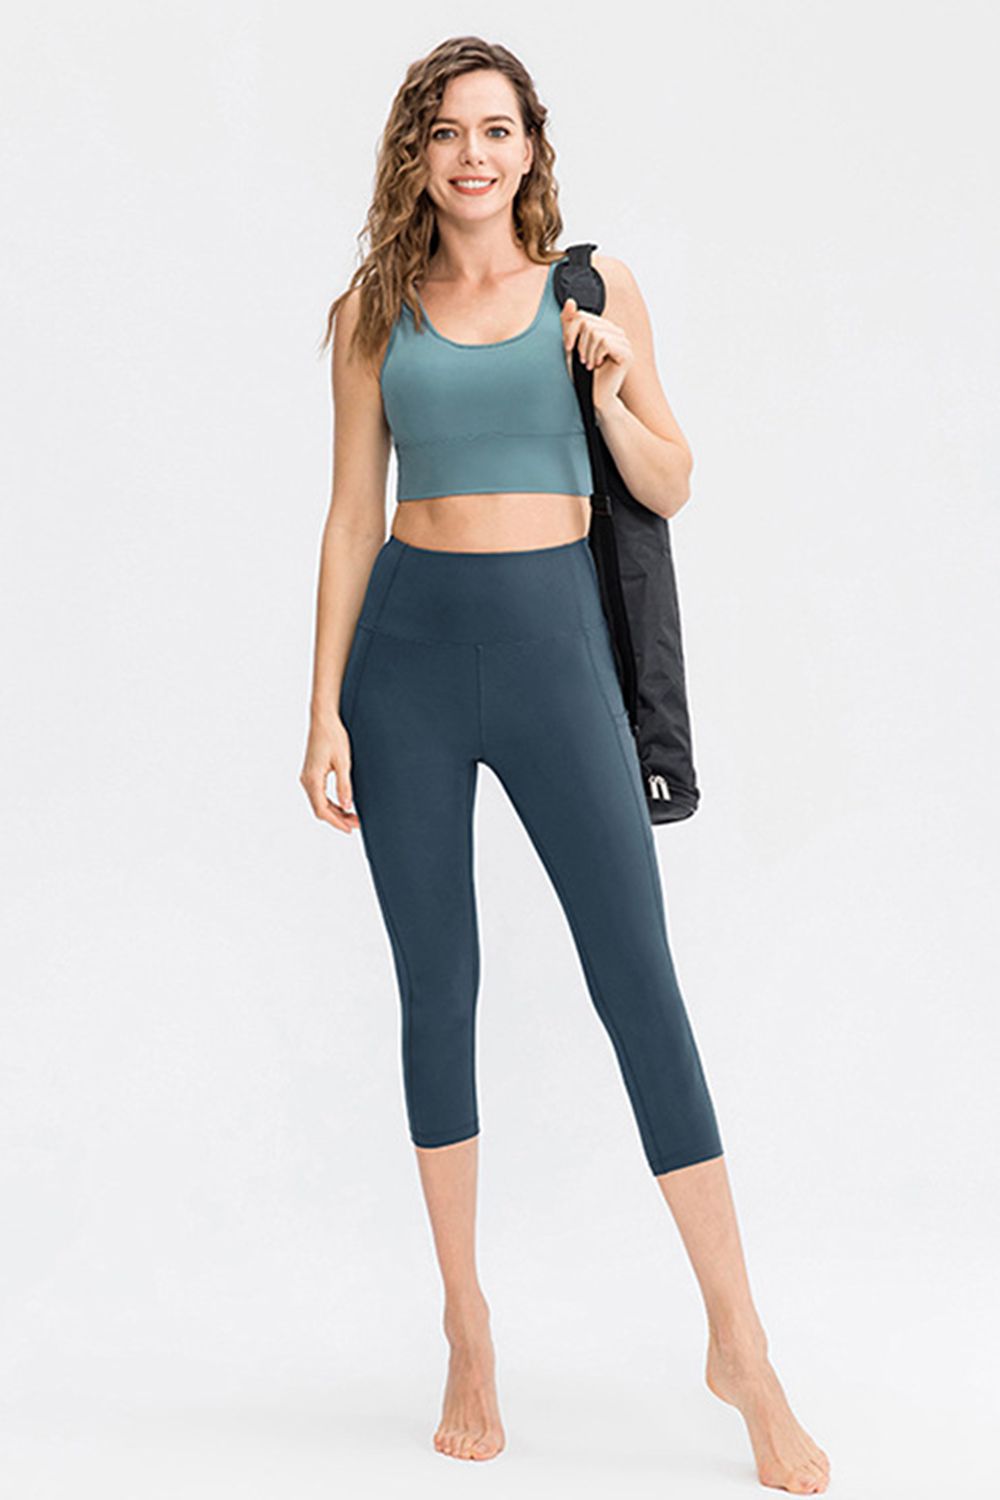 Wide Waistband Cropped Active Leggings with Pockets - Women’s Clothing & Accessories - Activewear - 9 - 2024